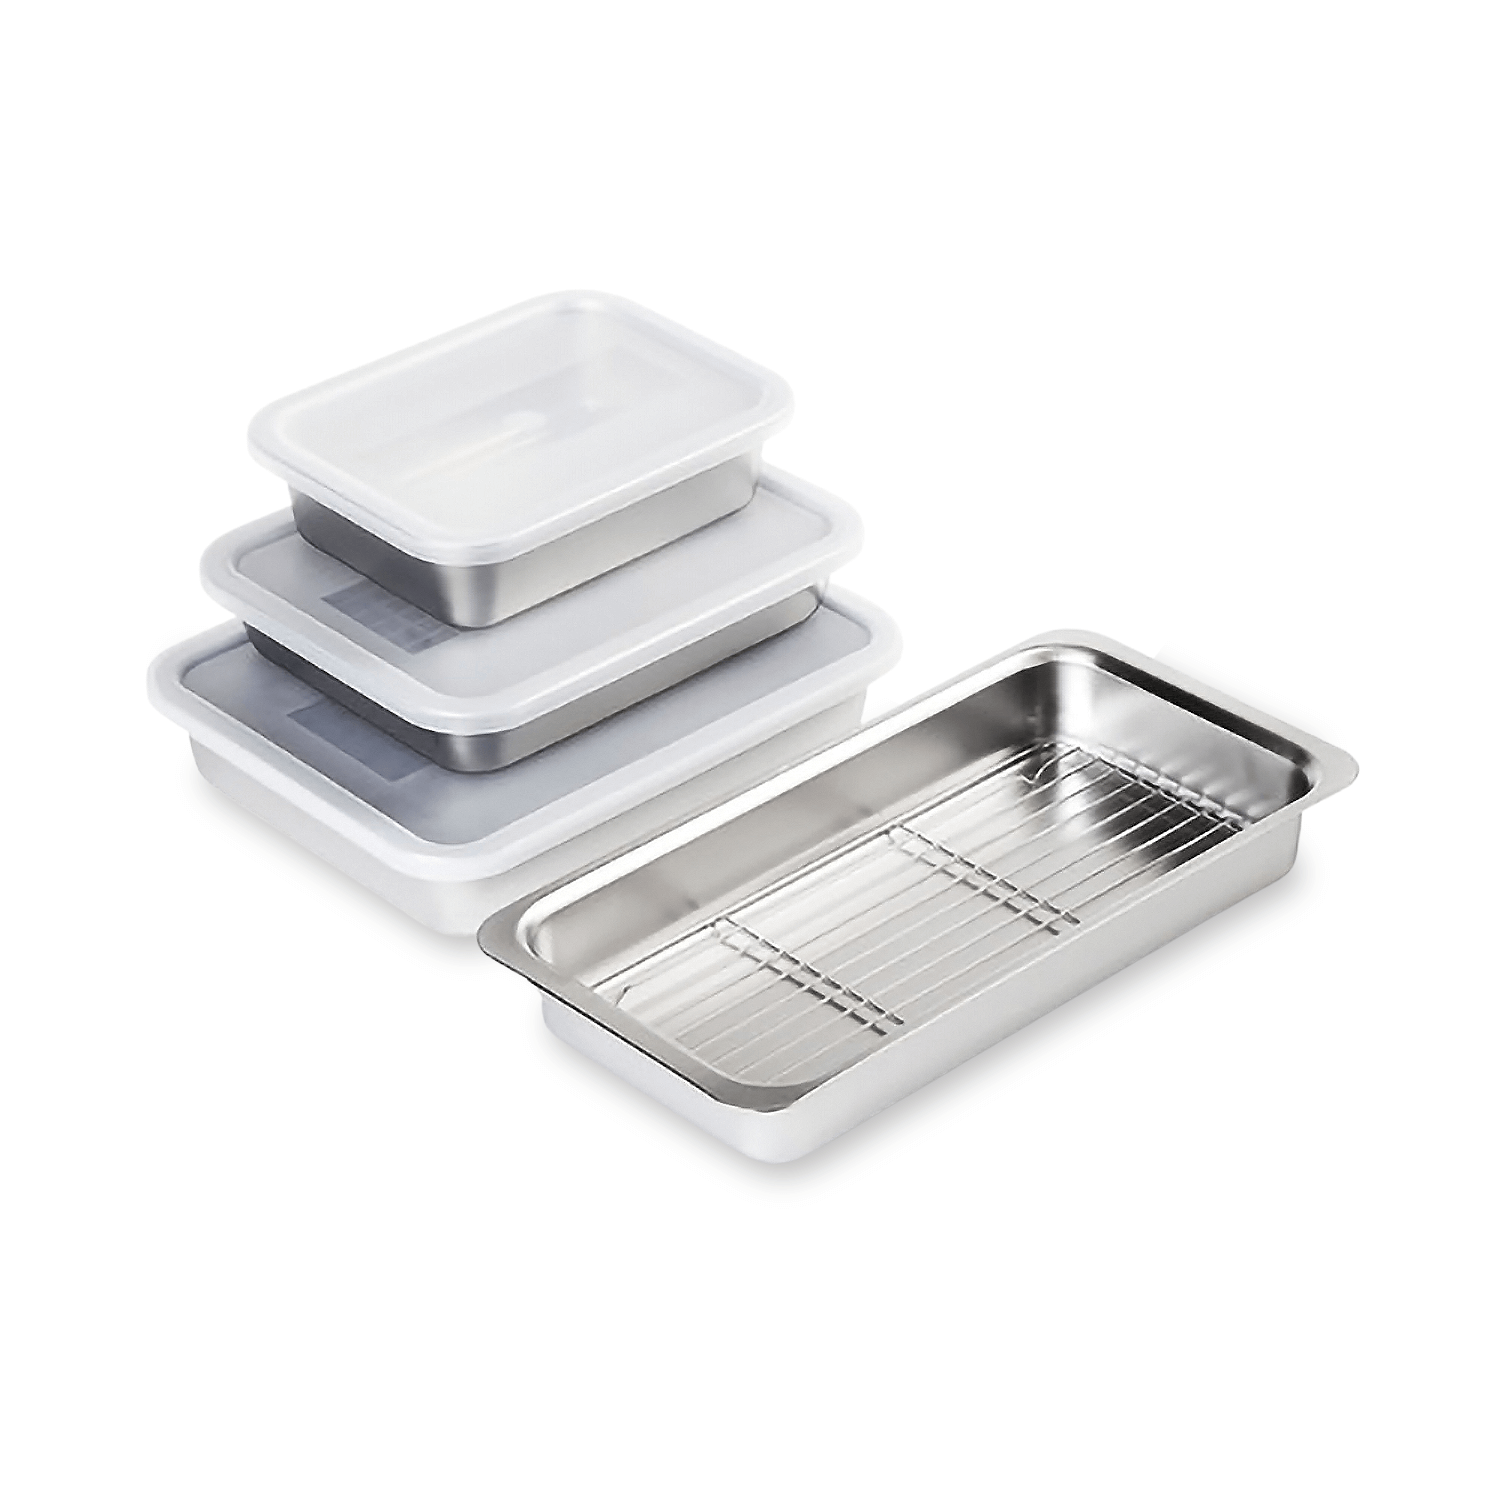 Altenbach Stainless Tray, Oil Drain Rack and Lid - 알텐바흐 스텐